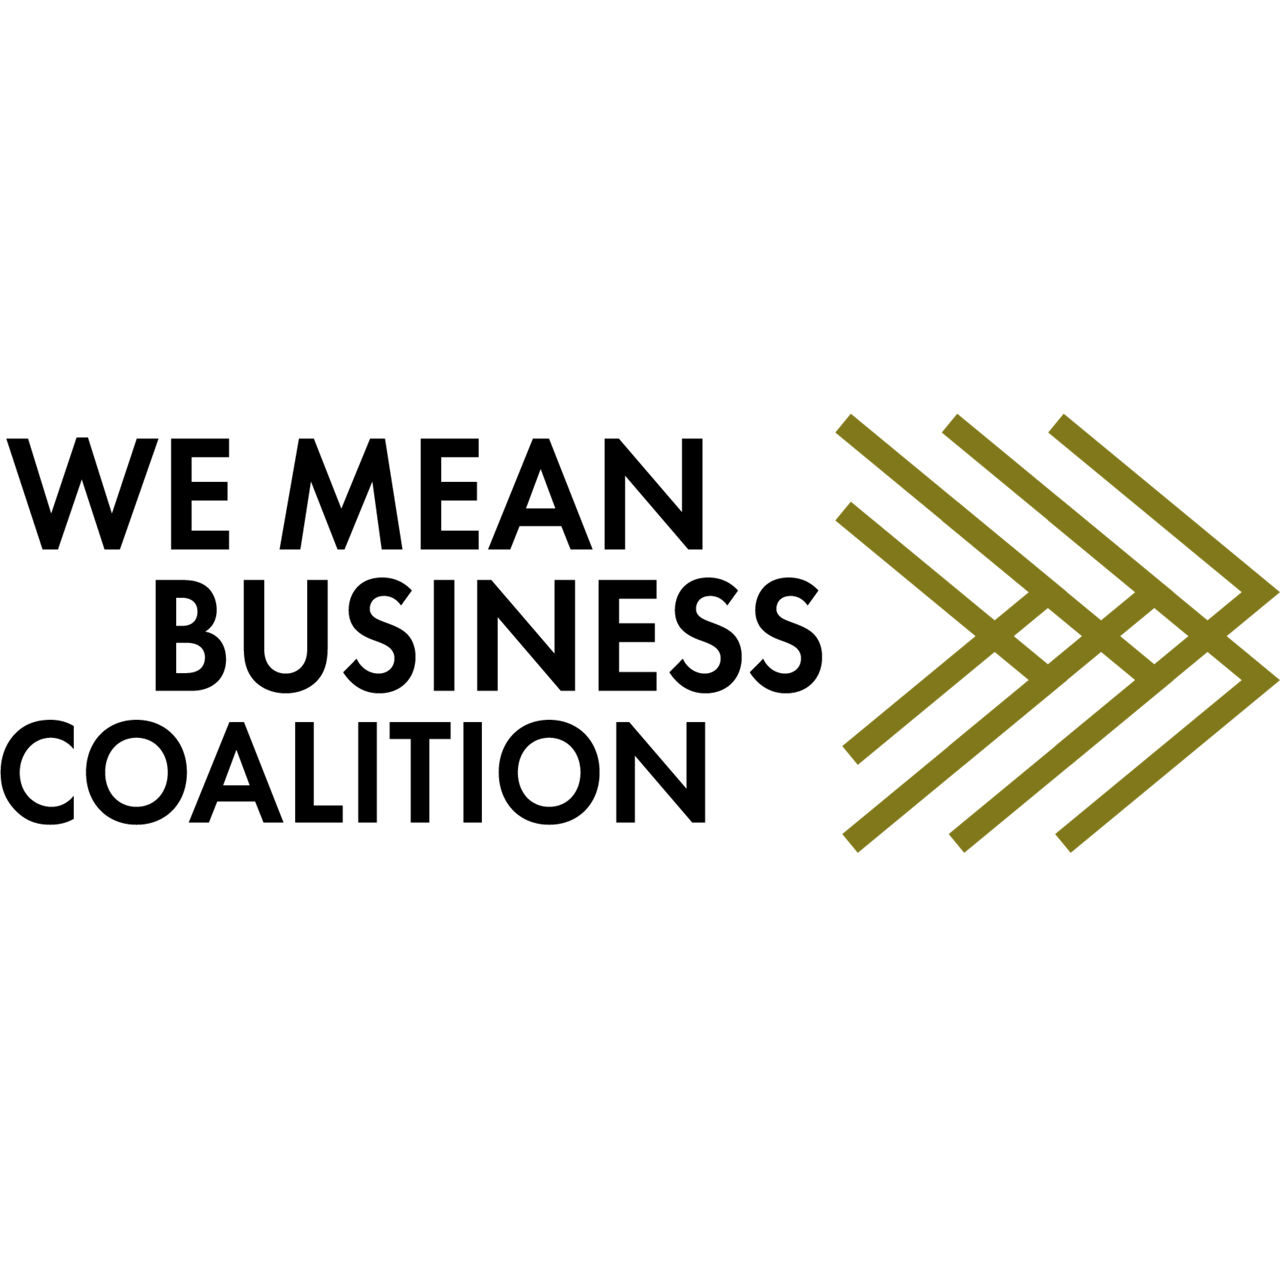 We mean business coalition logo